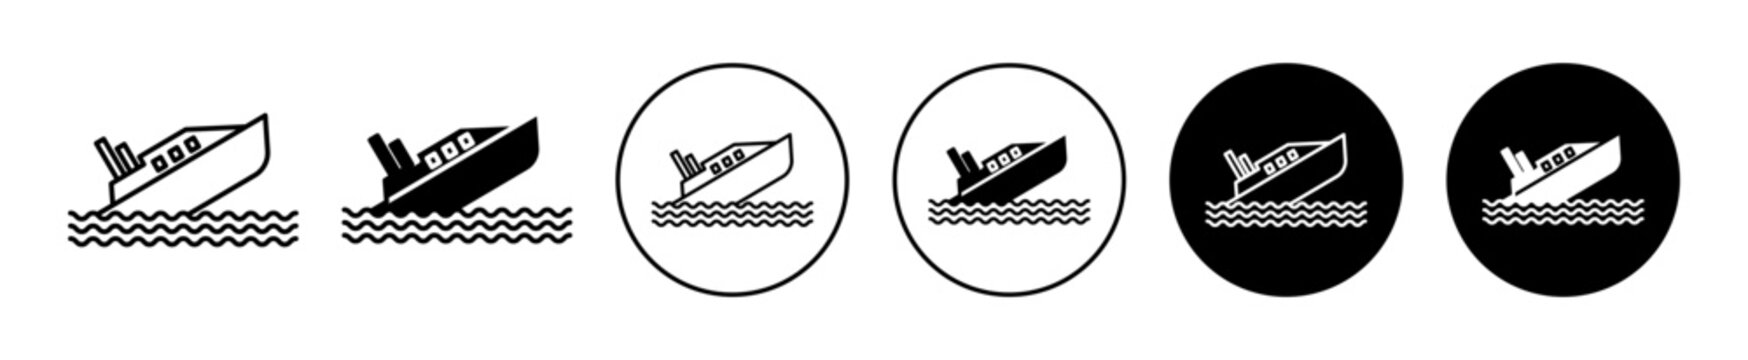 Sinking titanic icon set. cargo ship accident vector symbol. shipping boat disaster sign in black filled and outlined style.
